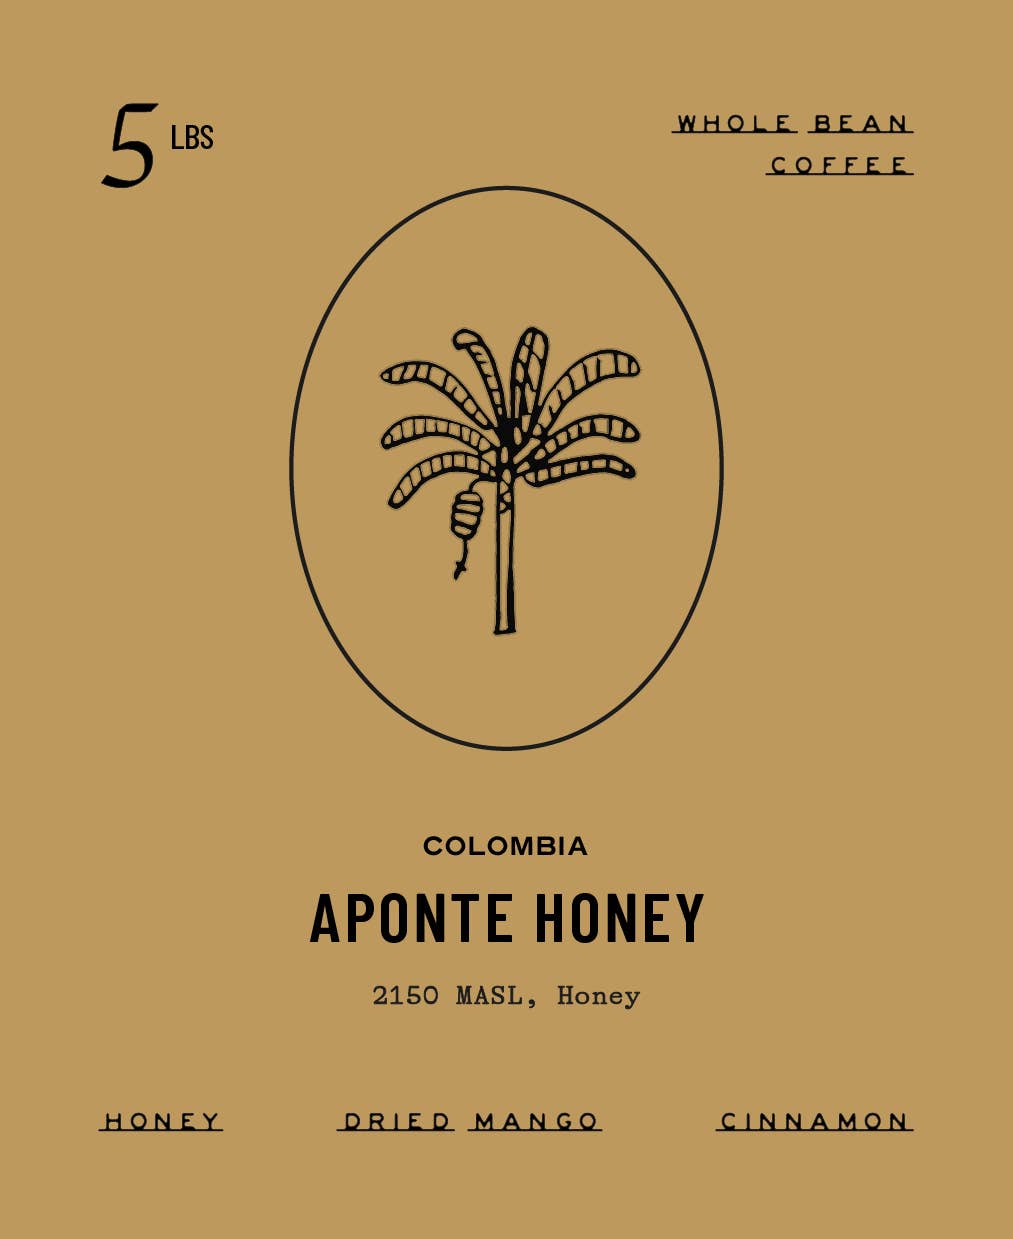 Colombia Aponte Honey - Fresh Roasted Coffee - Ground: 340g